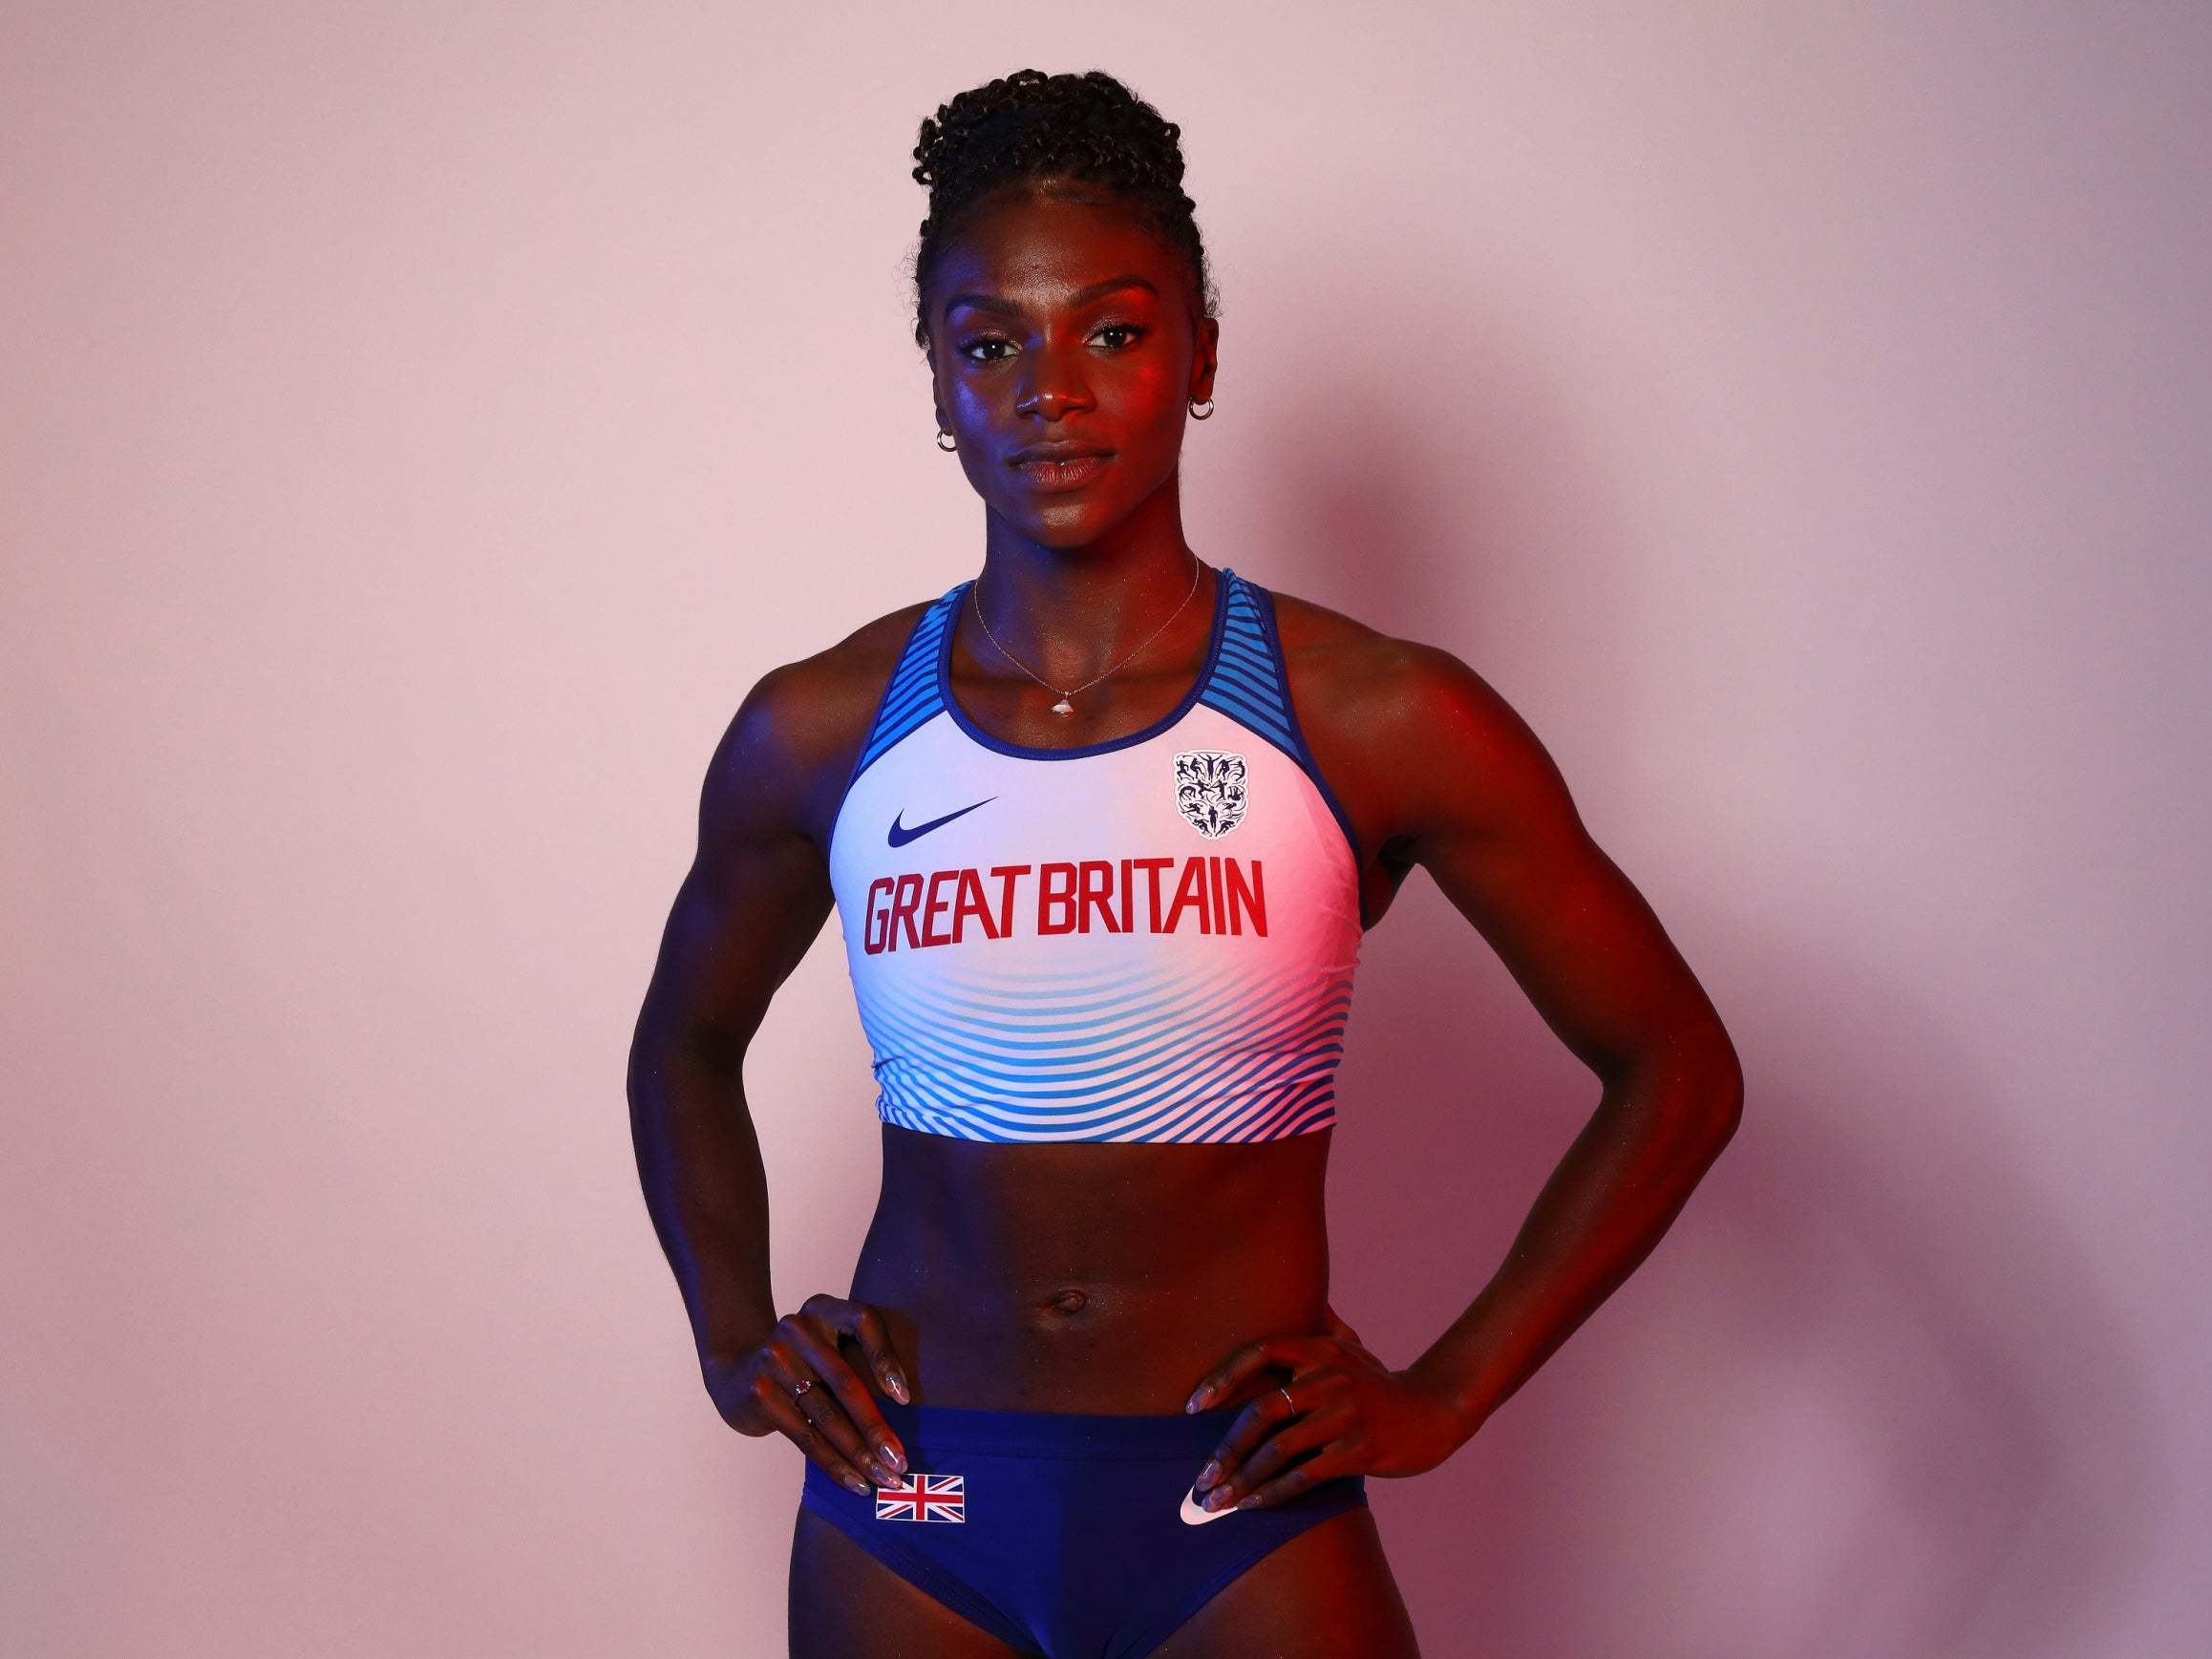 Asher-Smith heads to Doha as one of the poster girls for Team GB